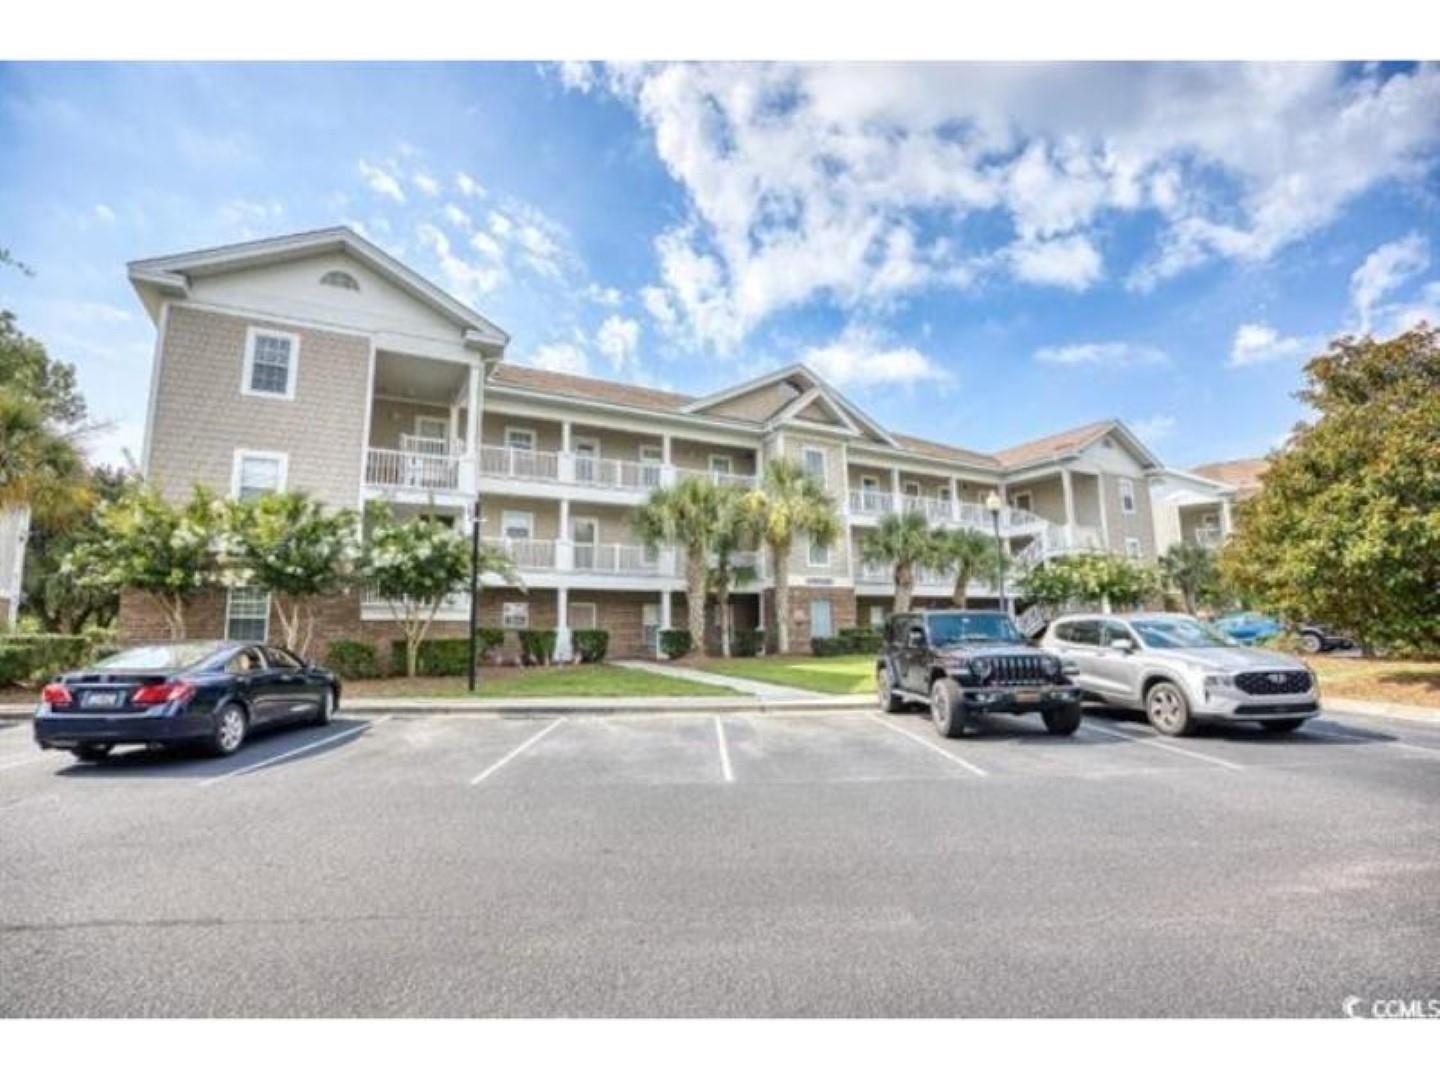 highly sought after first floor 2br/2ba condo located in the desirable community of ironwood at barefoot resort! ironwood is the only community in barefoot to have its own tennis/pickle ball court, volleyball court and basketball court for added enjoyment year-round. this furnished condo features a fully equipped kitchen and washer/dryer for all the conveniences of home and makes a great primary home, vacation get away or rental property. sit and relax on your private screened porch, perfect for enjoying your morning coffee or afternoon cocktail. attached is an outside storage closet for all your beach items. this property is well priced allowing you to come make your own personal updates to reflect your style. a golf membership is available at a discounted, ask your agent for more details. the amenities of barefoot are second to none, private beach cabana with gated parking and seasonal shuttle service, four championship golf courses, onsite restaurants and pools. the hoa fees are the best deal on the grand strand, including basic cable, internet, water, sewer, trash, pest control, building insurance & landscaping as well the on-site amenities. barefoot is located just minutes from the ocean and close to all that north myrtle beach and the surrounding area has to offer. here you will find endless choices of activities, including golf, restaurants, shopping and entertainment for the whole family!